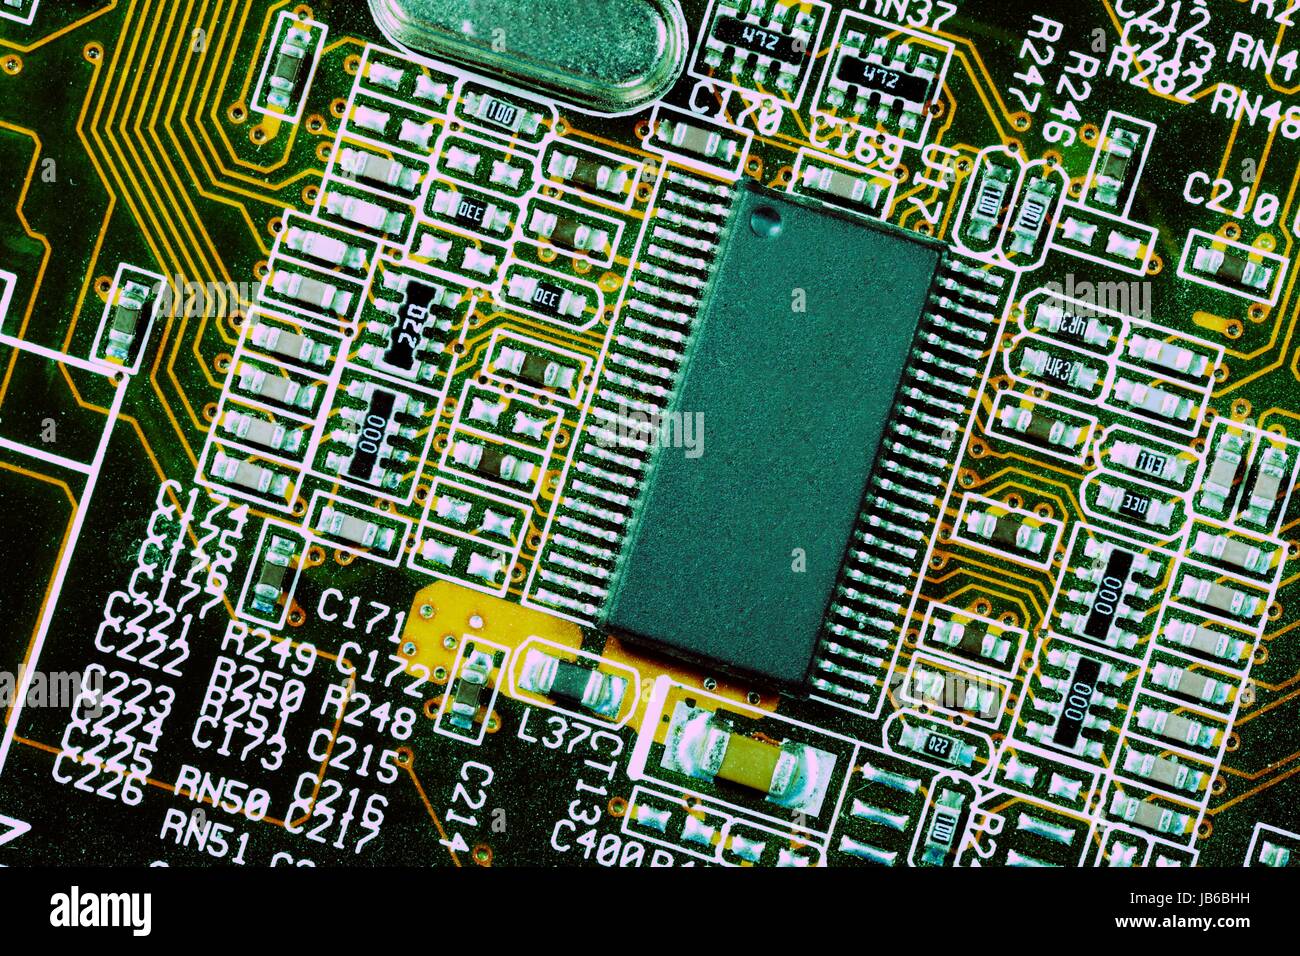 Computer mother board with microchips and electrodes. Stock Photo